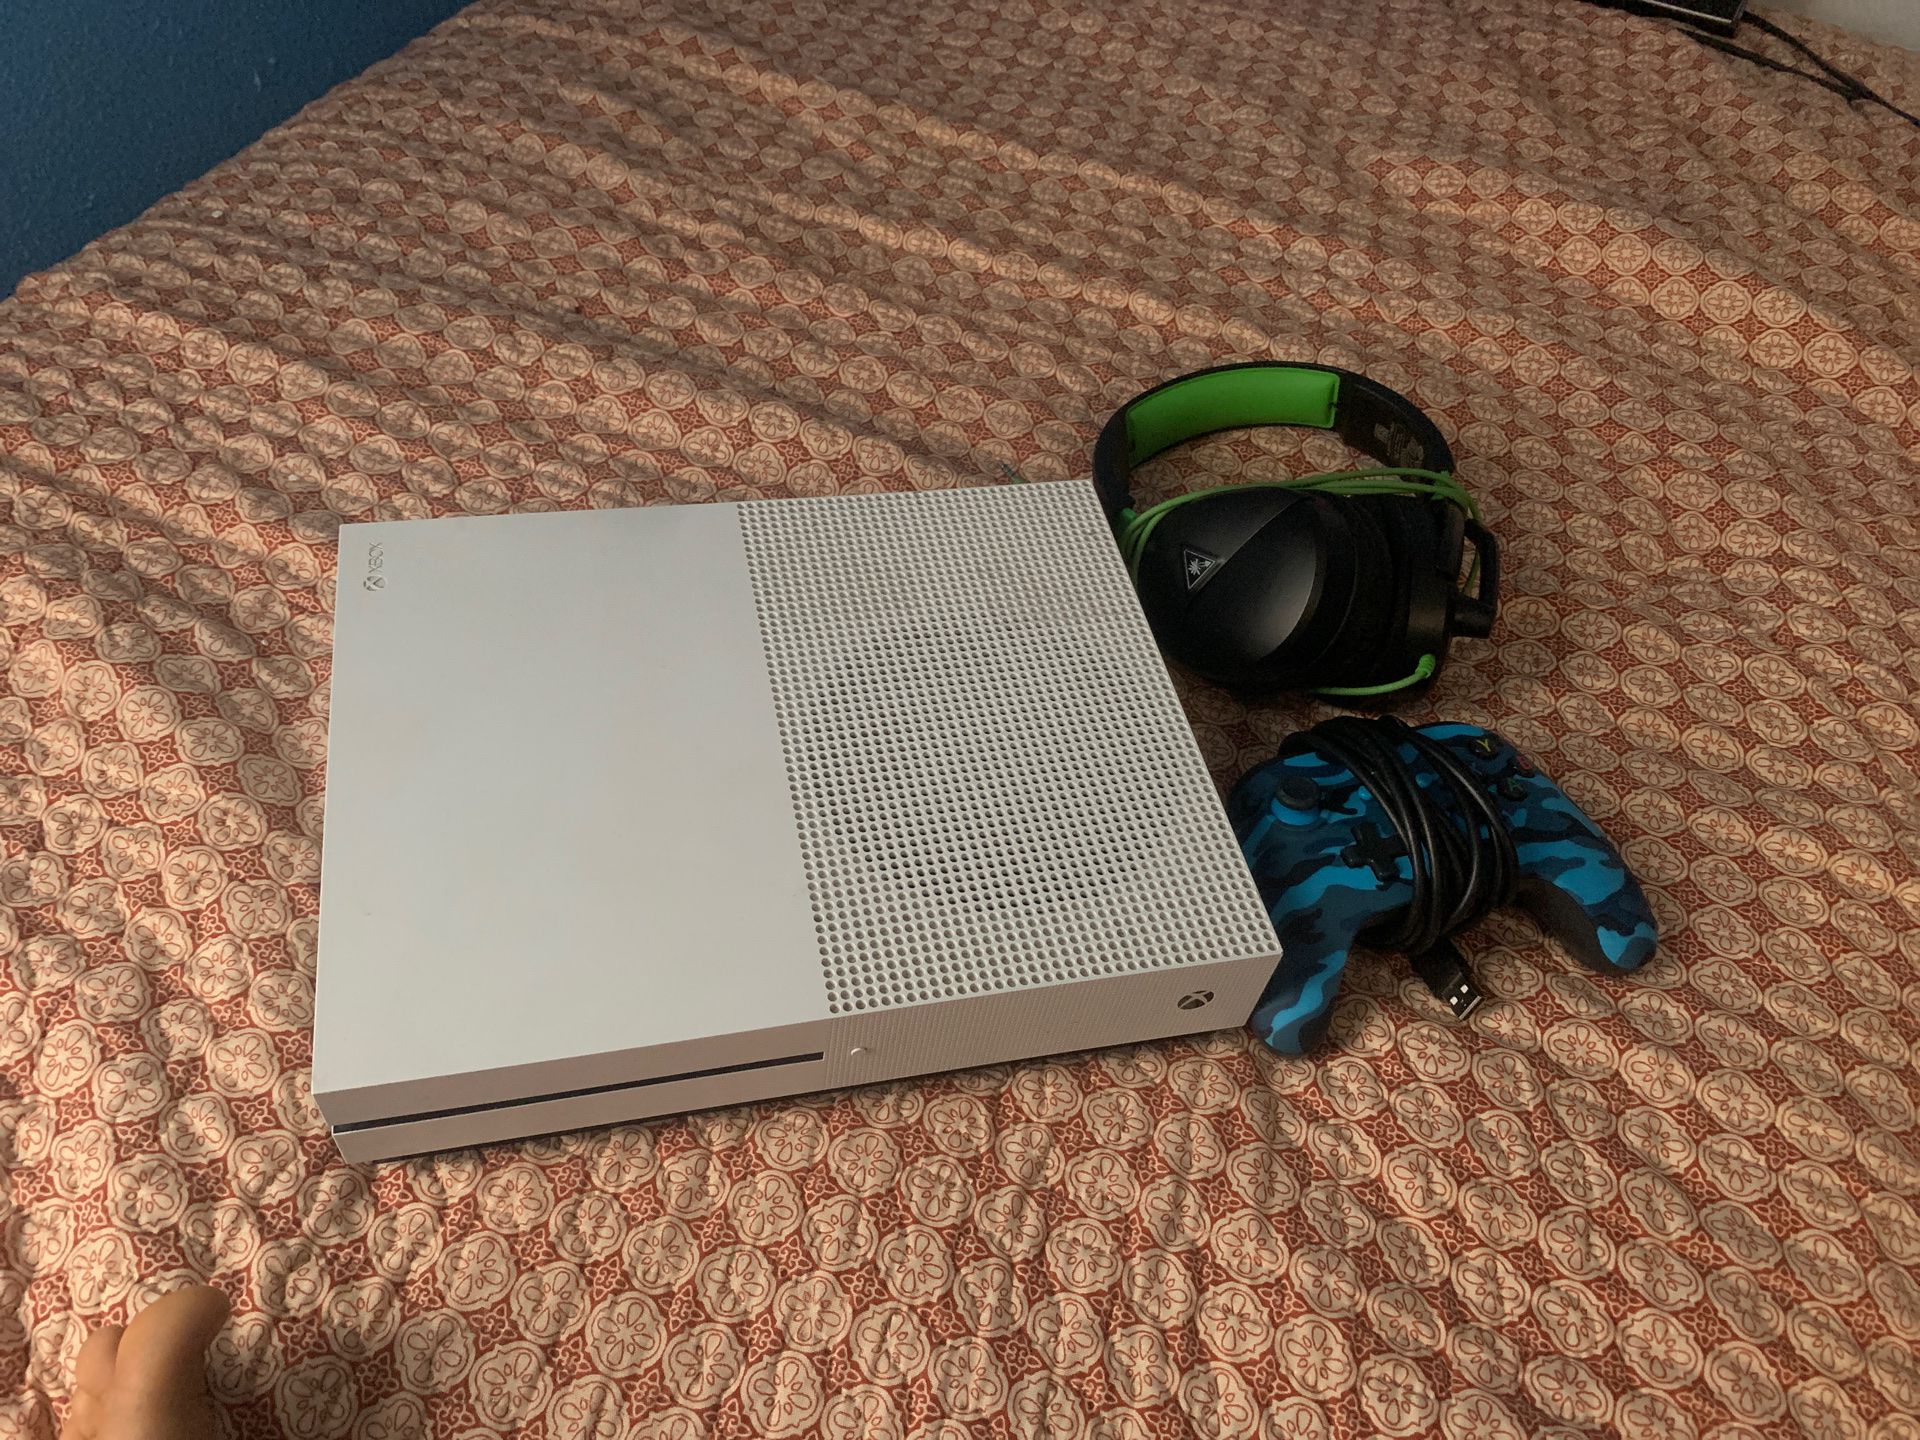 Xbox one s with controller and 25+ games